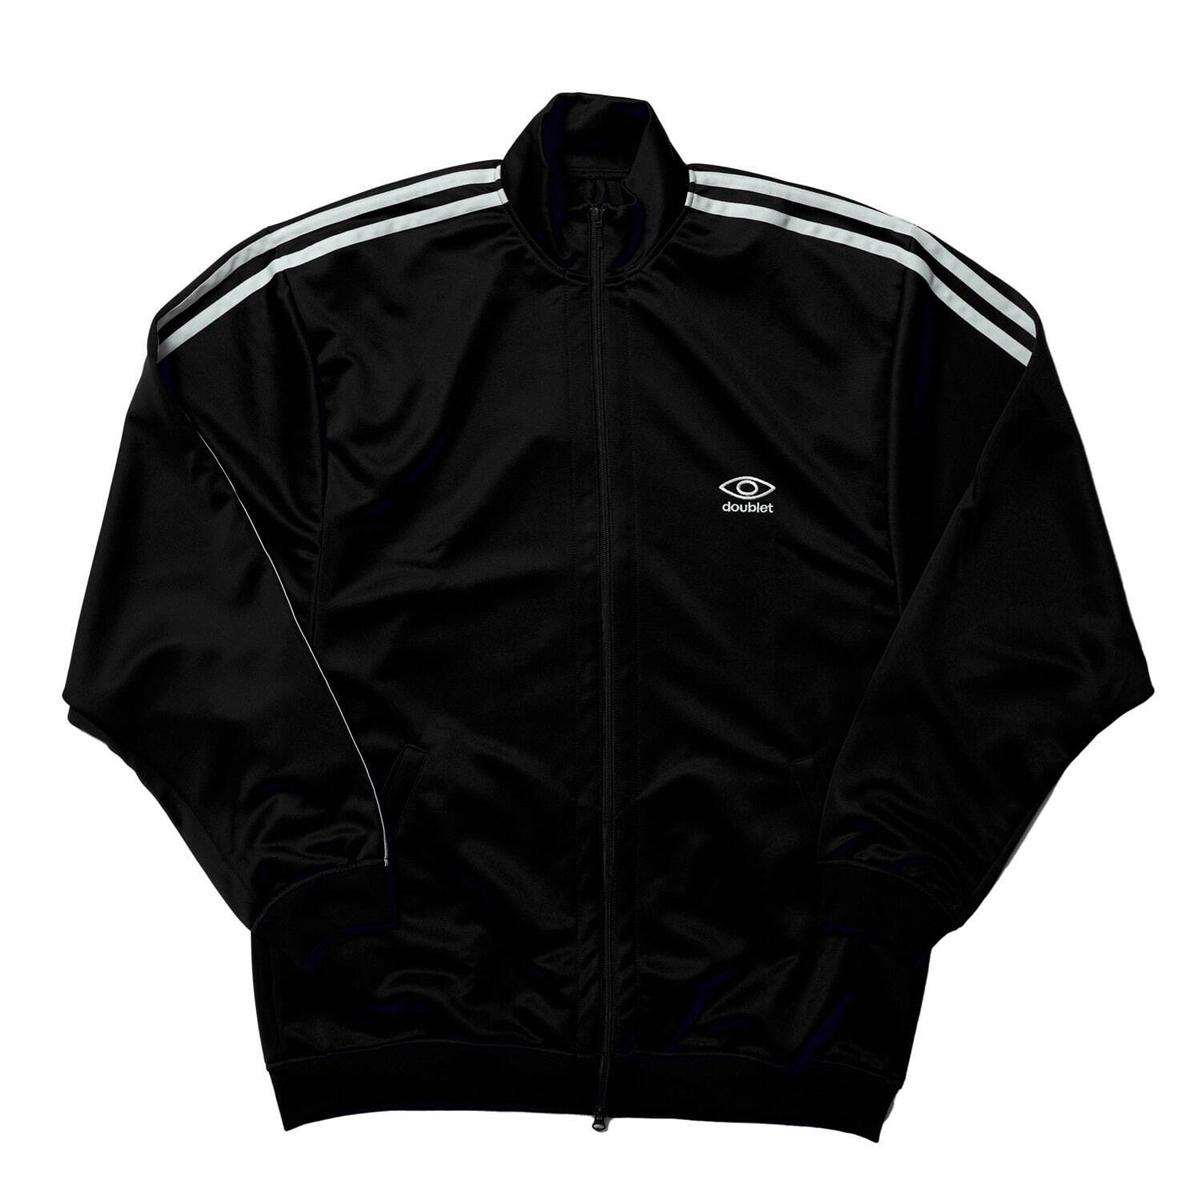 Doublet's Headless Tracksuits Hits Shelves Soon